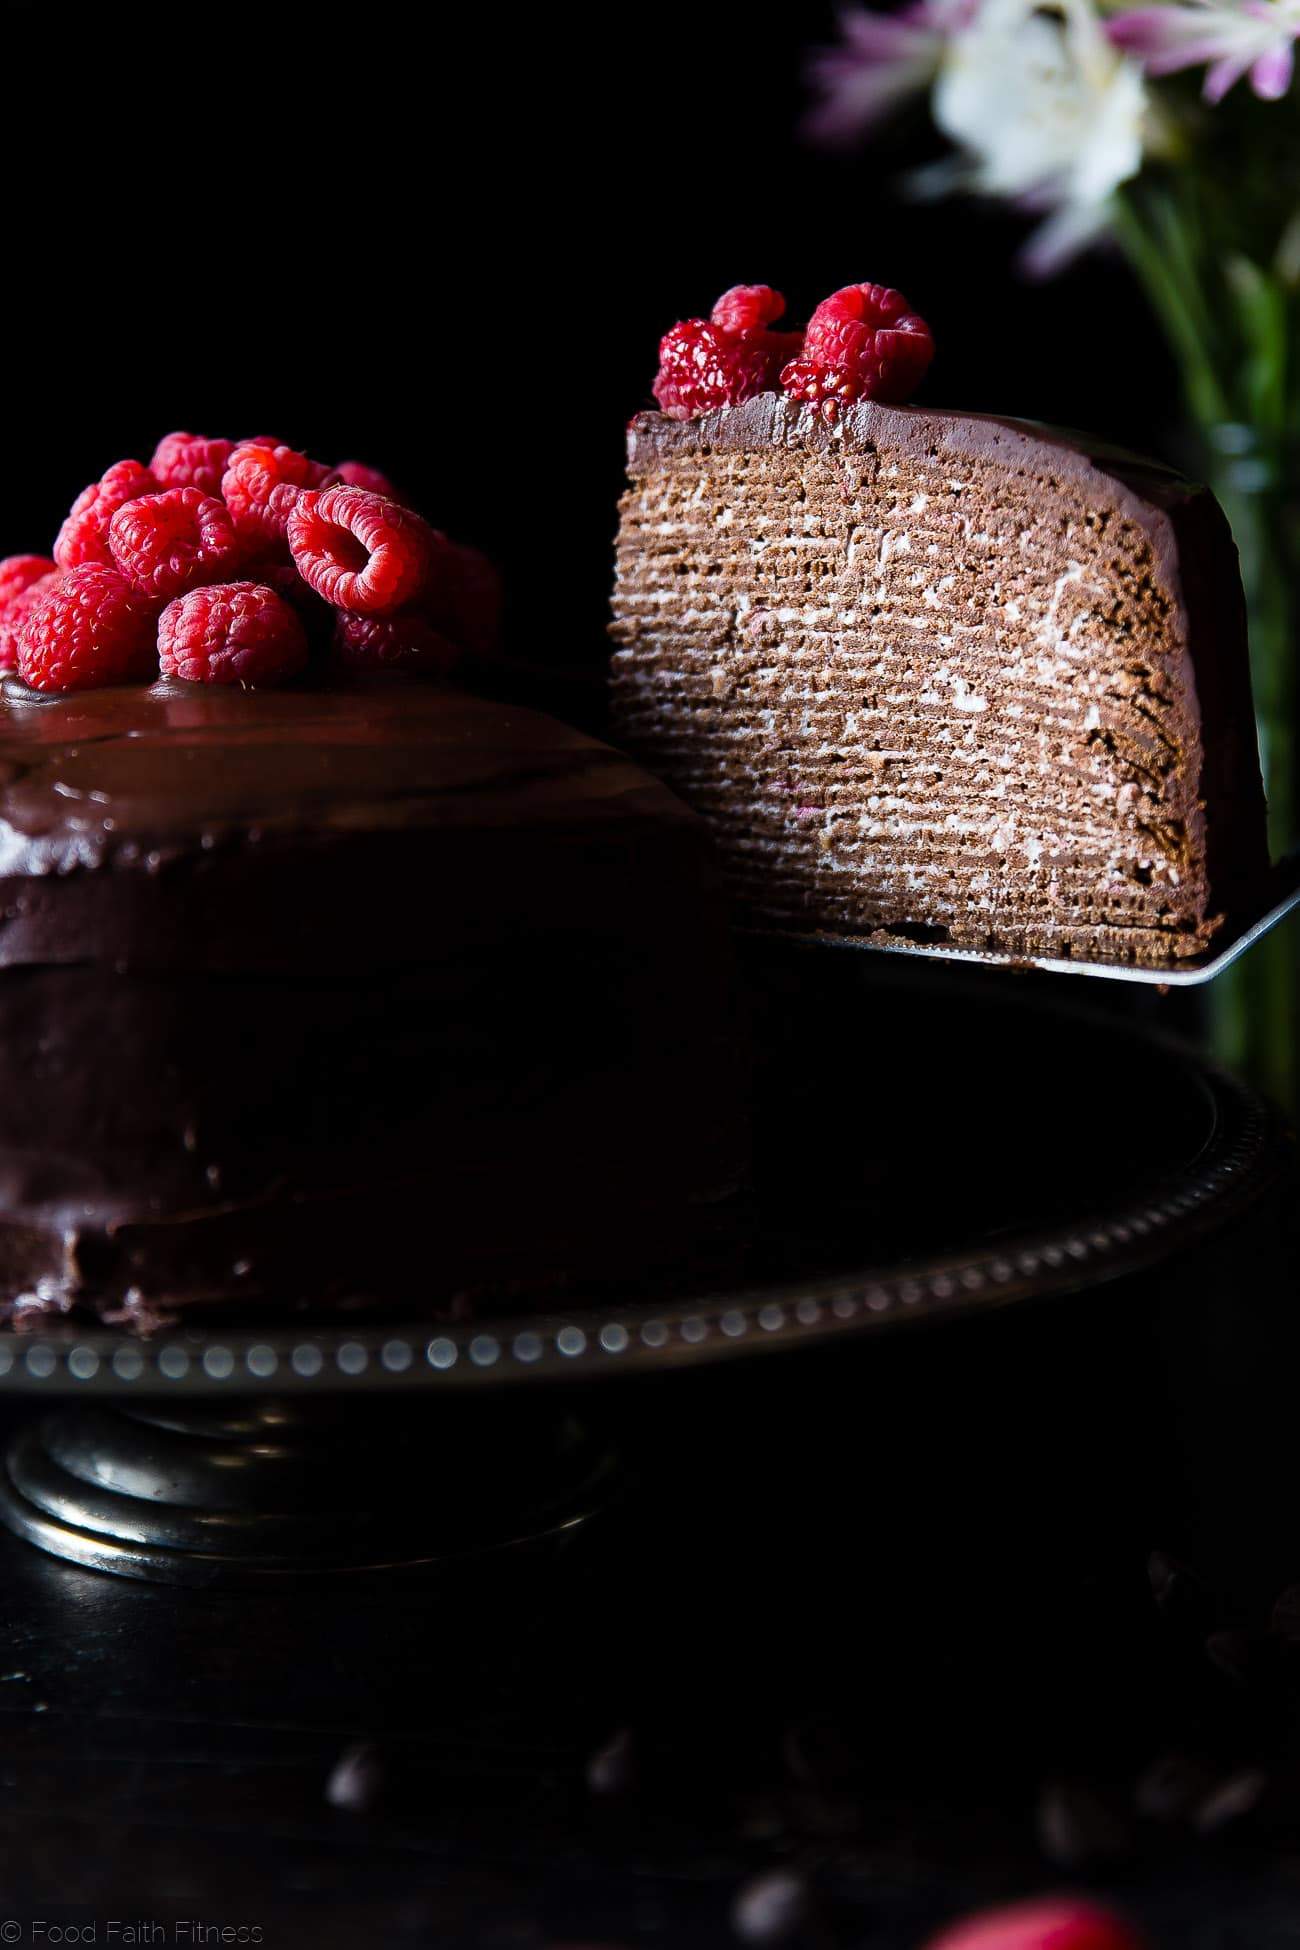 Raspberry Chocolate Vegan Crepe Cake - These crepe cake is made of chocolate crepes layered with raspberries and creamy coconut! It's an impressive healthier, gluten and dairy free dessert that everyone will love! | Foodfaithfitness.com | @FoodFaithFit